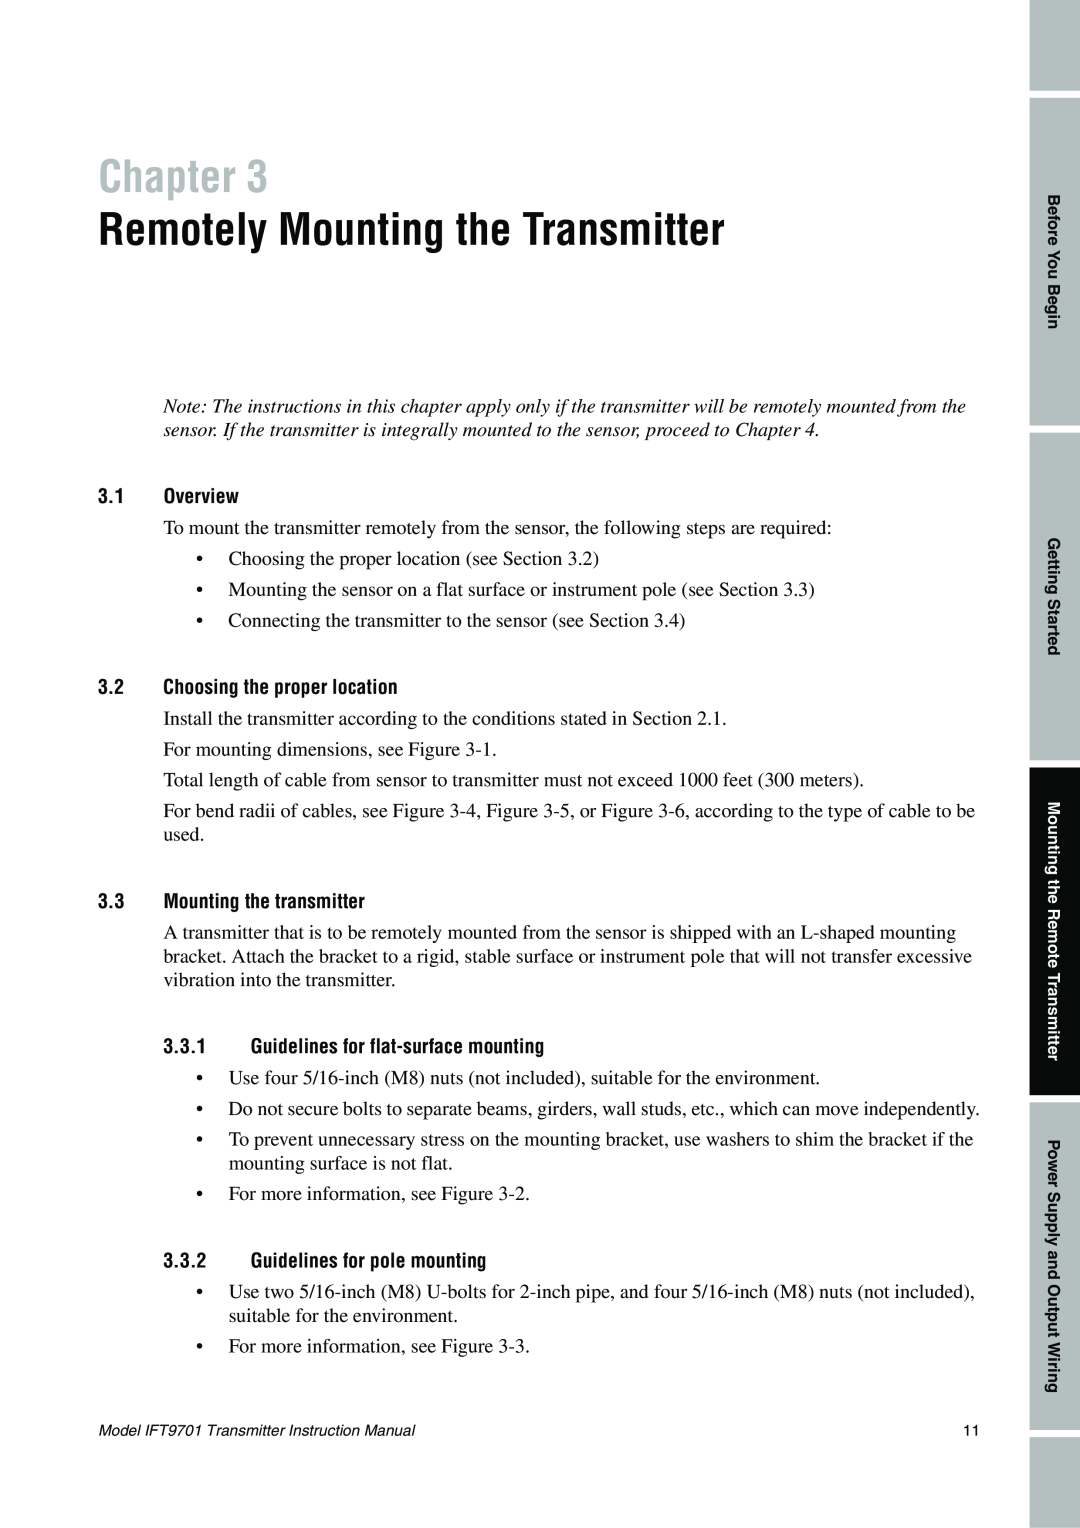 Emerson IFT9701 instruction manual Remotely Mounting the Transmitter, Chapter, 3.1Overview, 3.2Choosing the proper location 